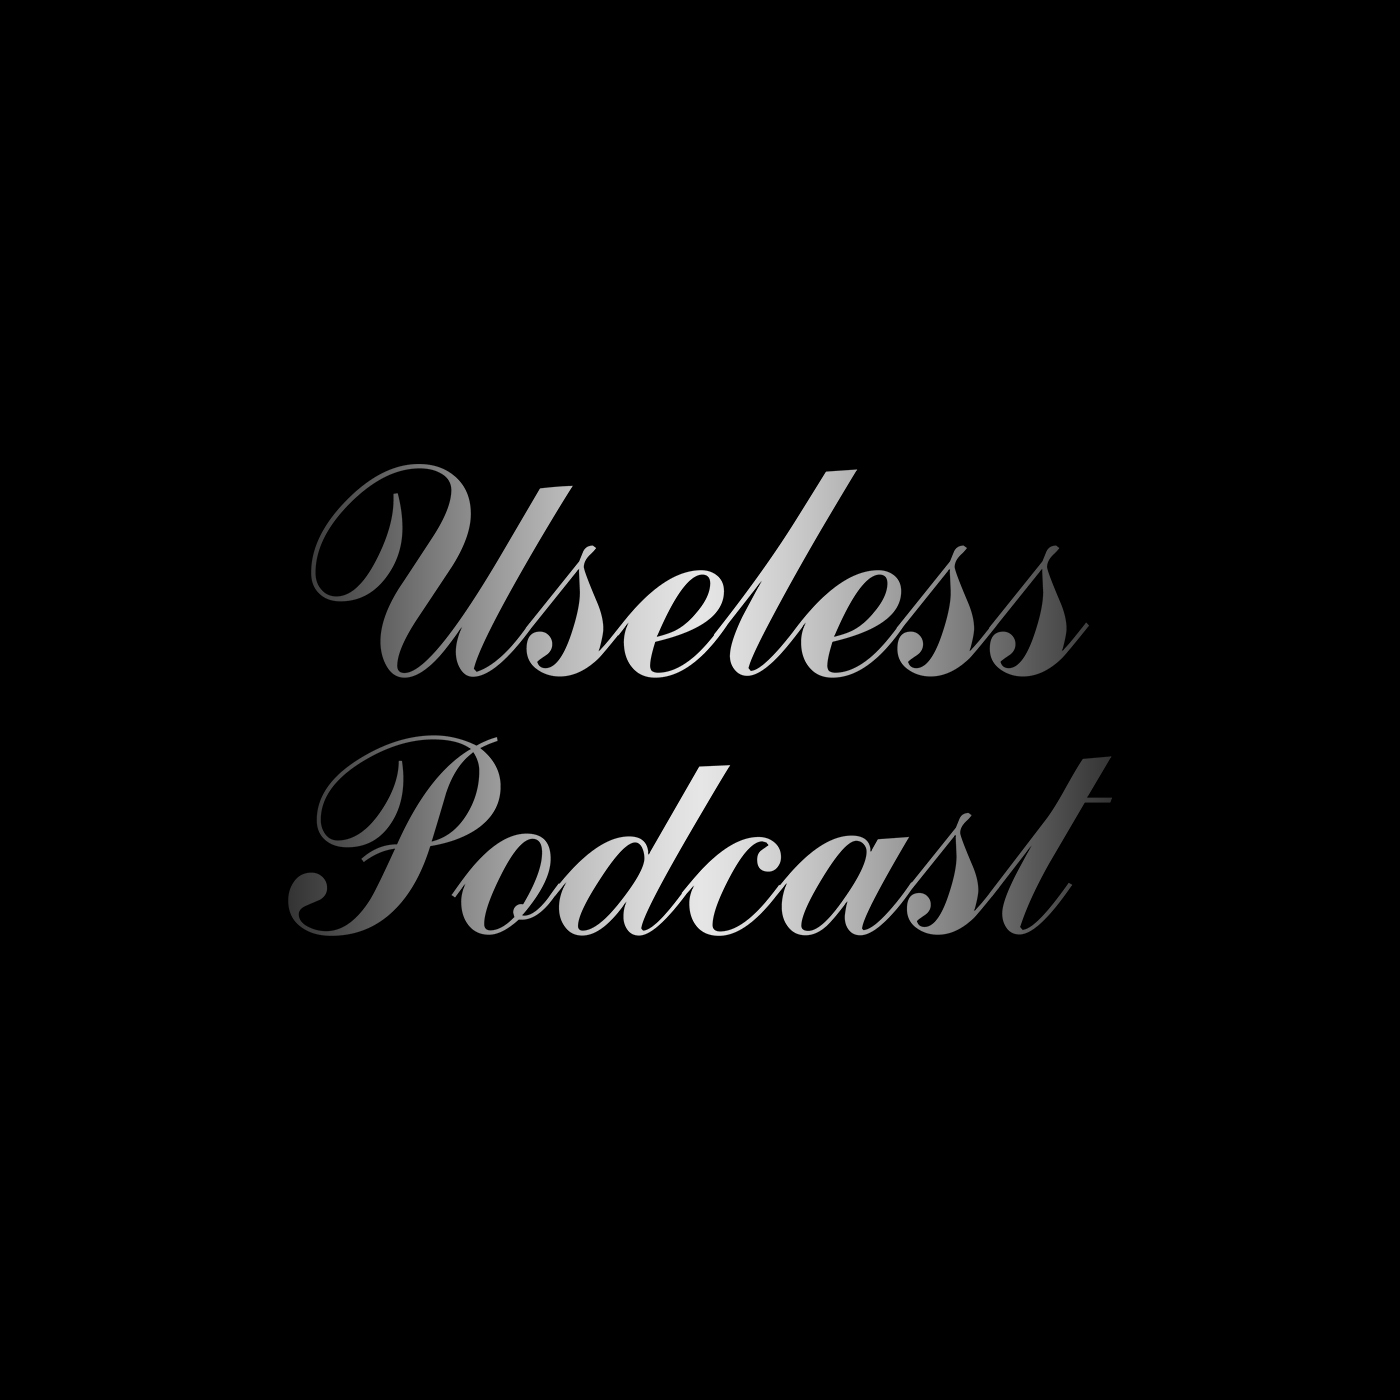 Episode 1 - Welcome To Useless